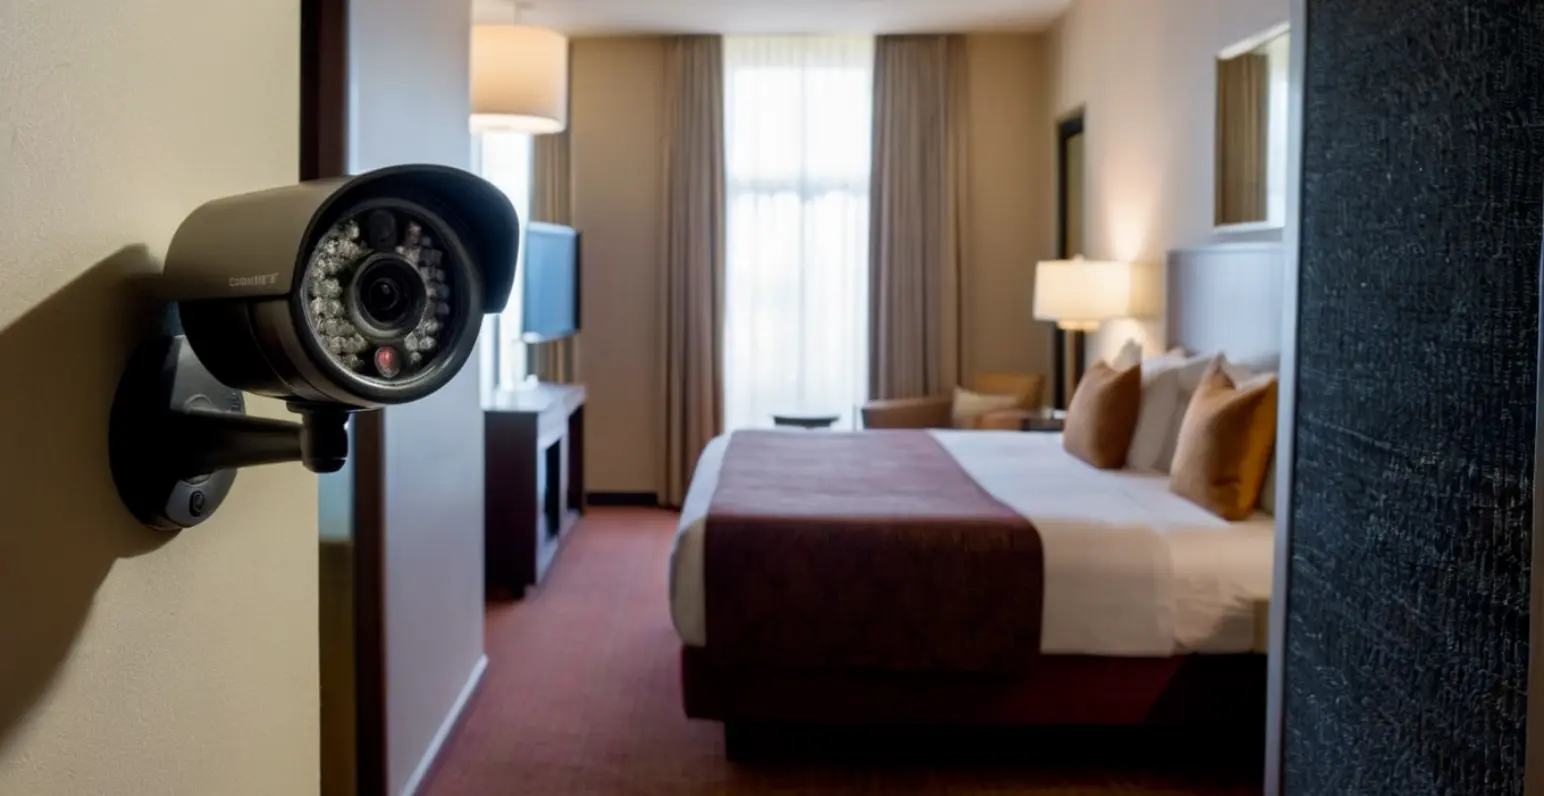 Applications of 180-Degree Hotel Security Cameras